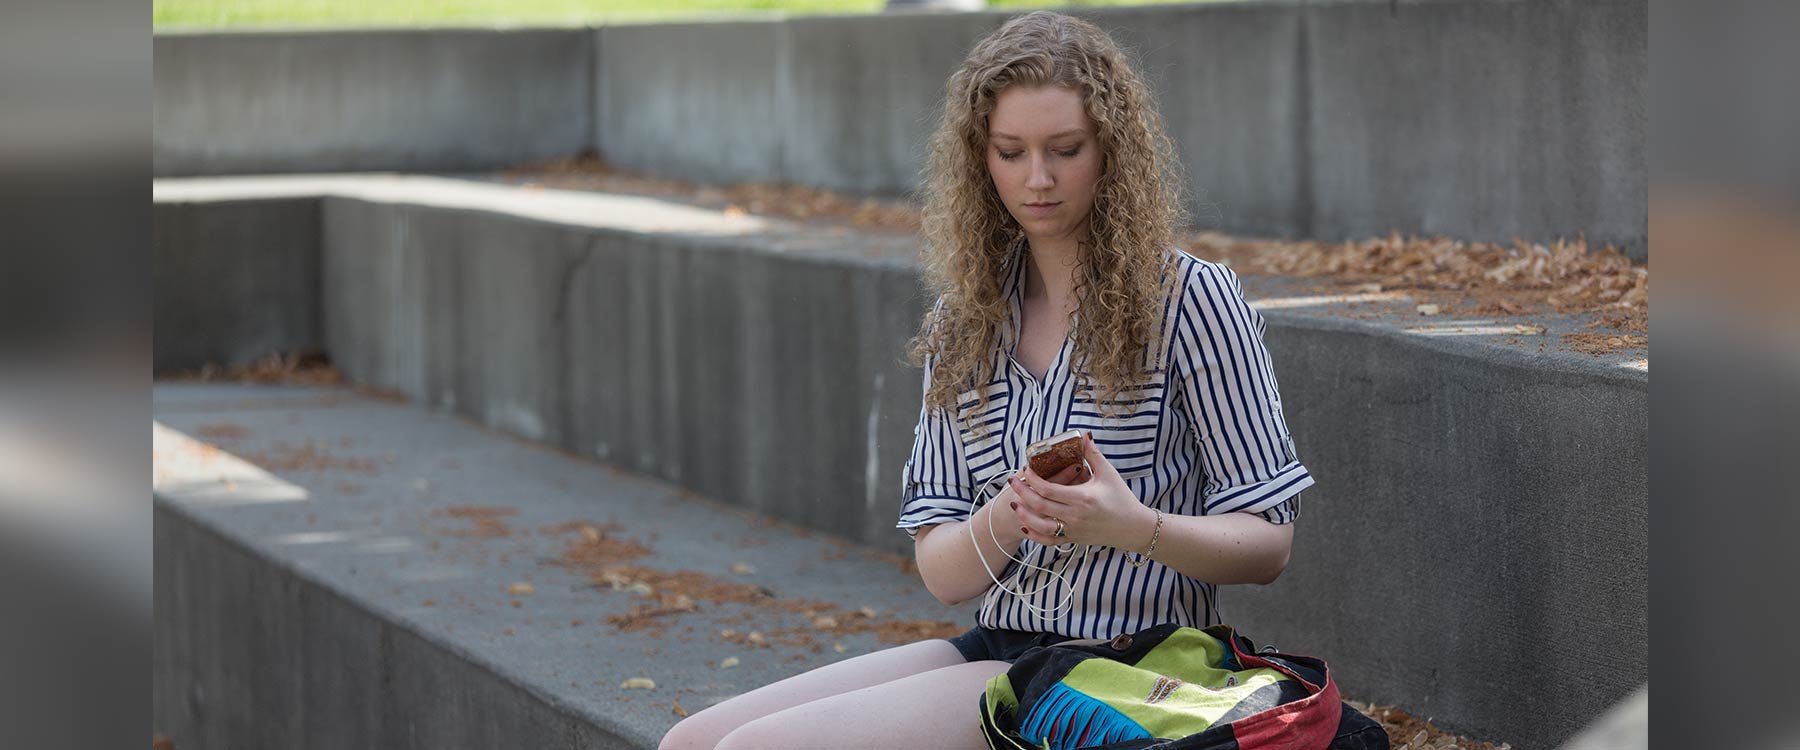 Victoria sits on the steps outside Cowles Memorial Library and looks down at her phone.